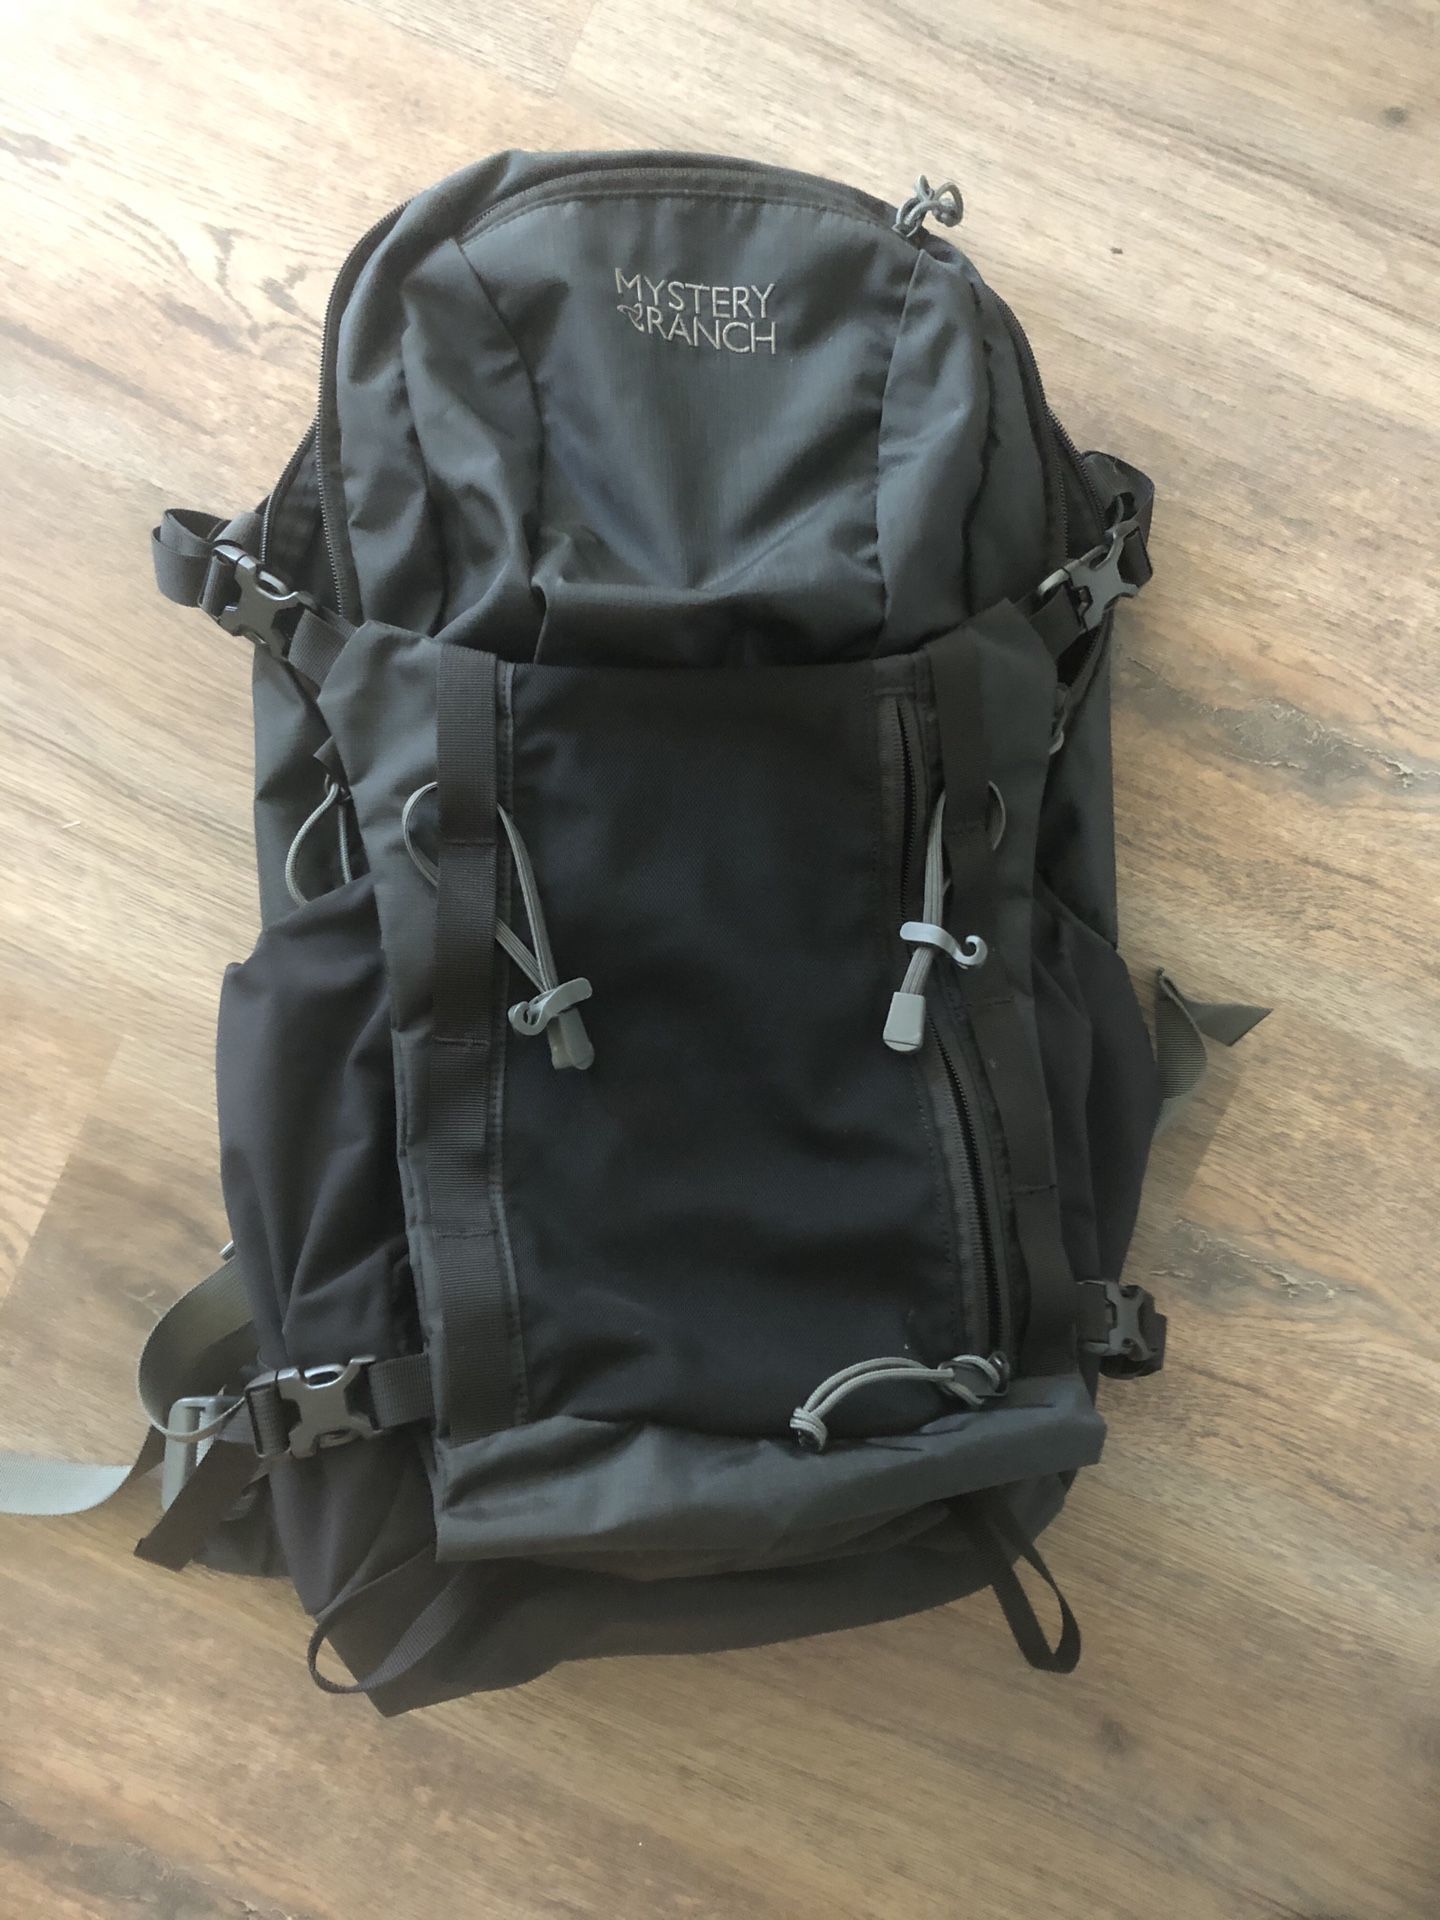 Mystery Ranch Backpack